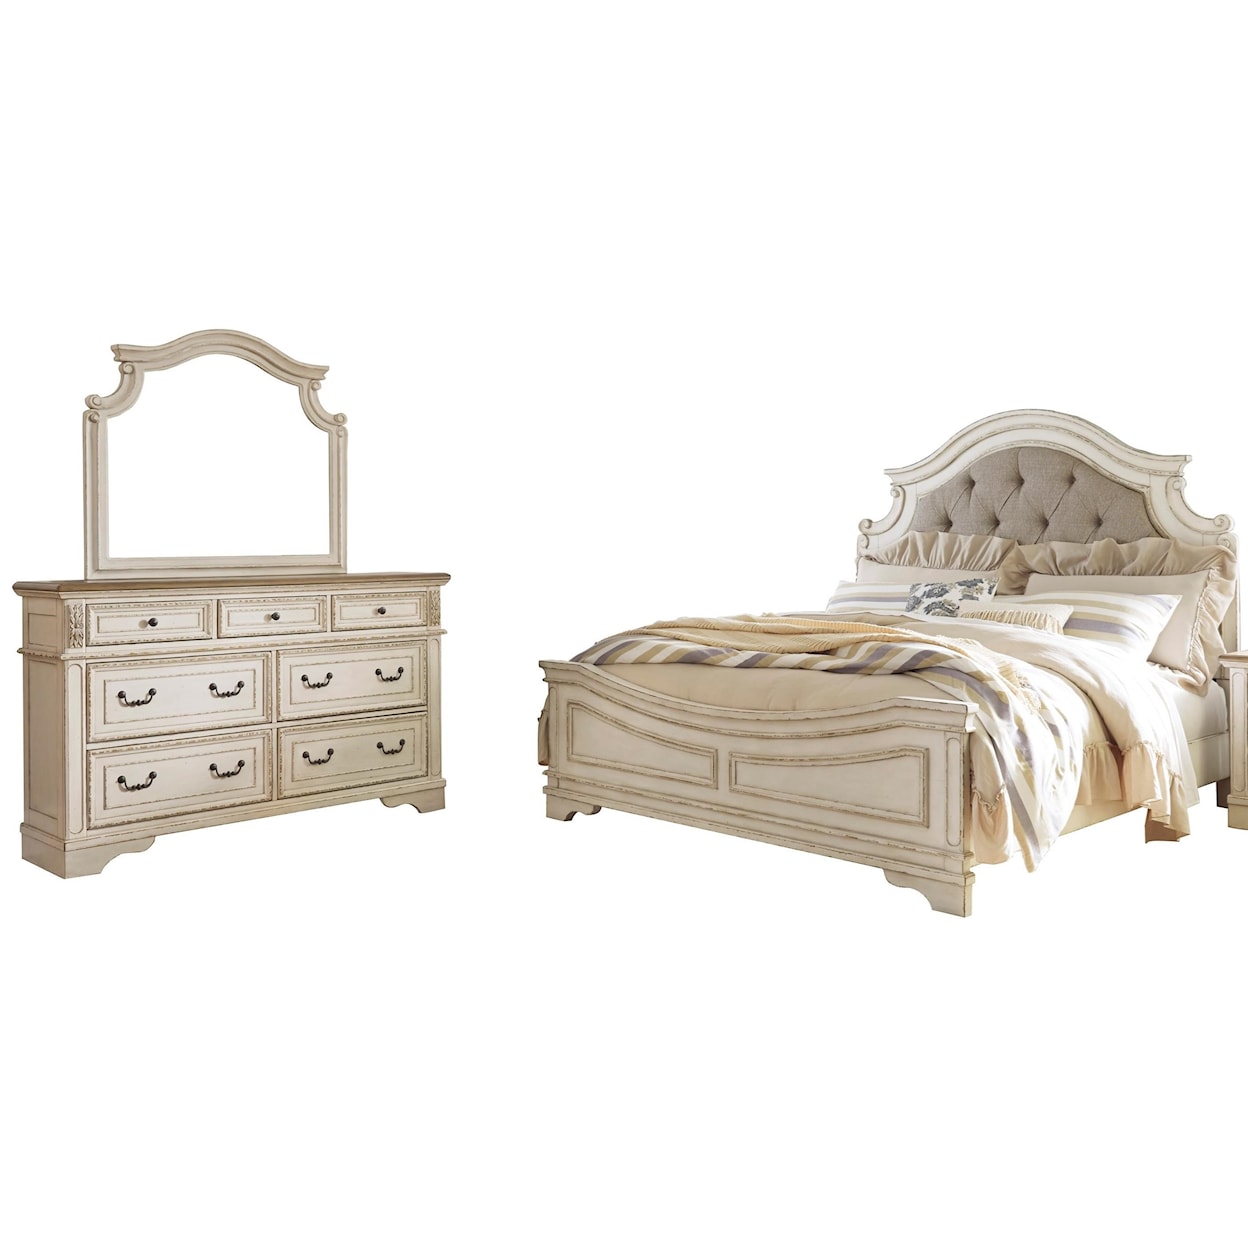 Signature Design by Ashley Realyn 5pc King Bedroom Group